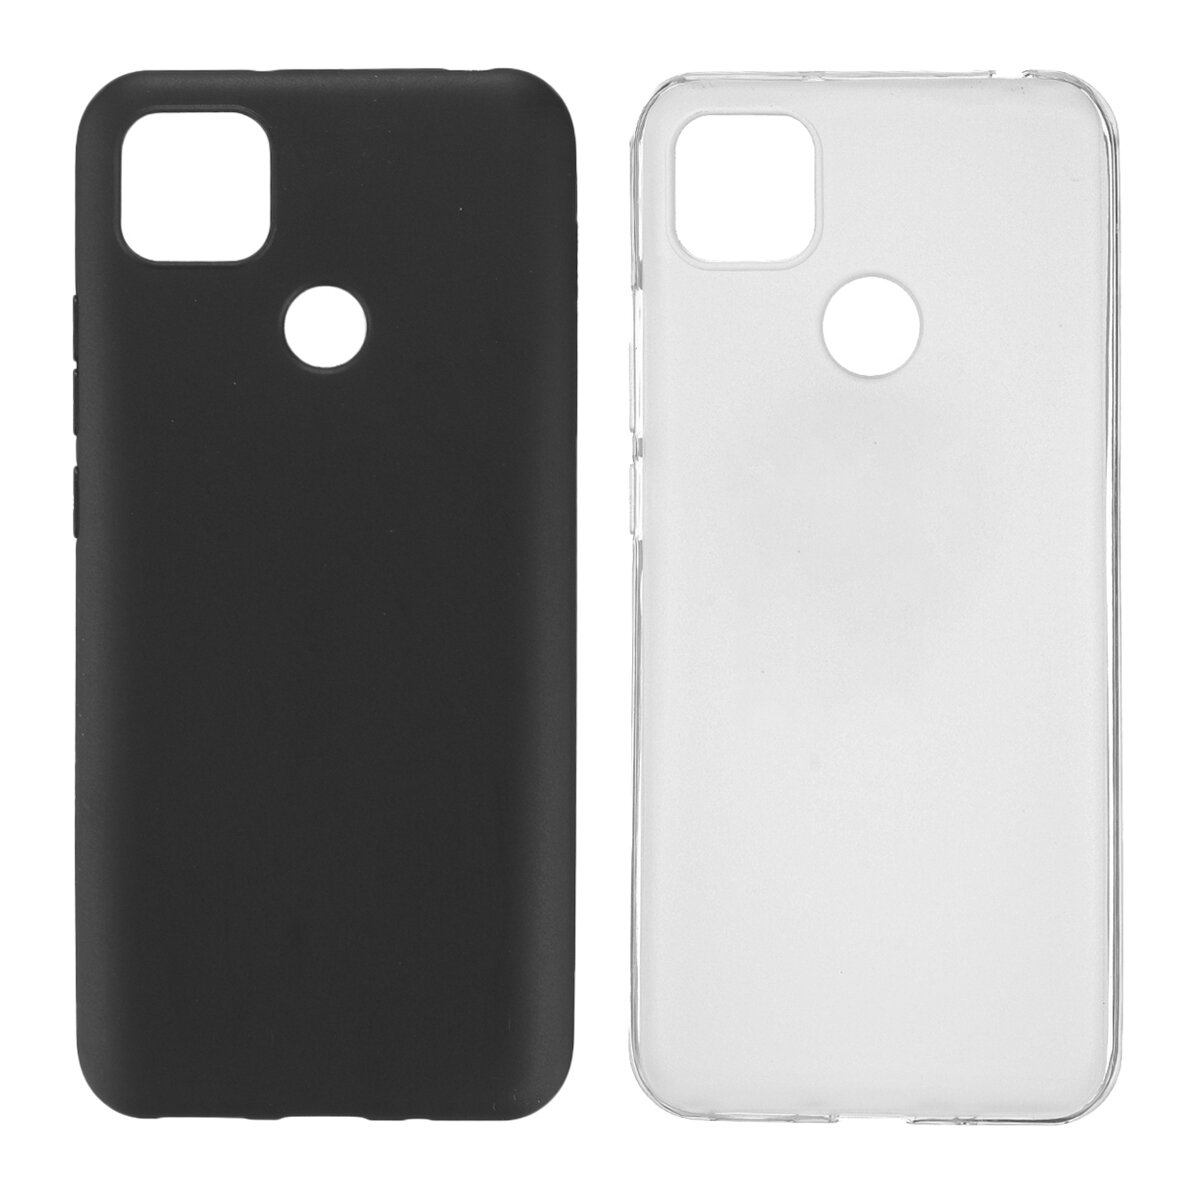 Bakeey Pudding Series Frosted Shockproof Ultra-Thin Non-Yellow Anti-Fingerprint Soft TPU Protective 